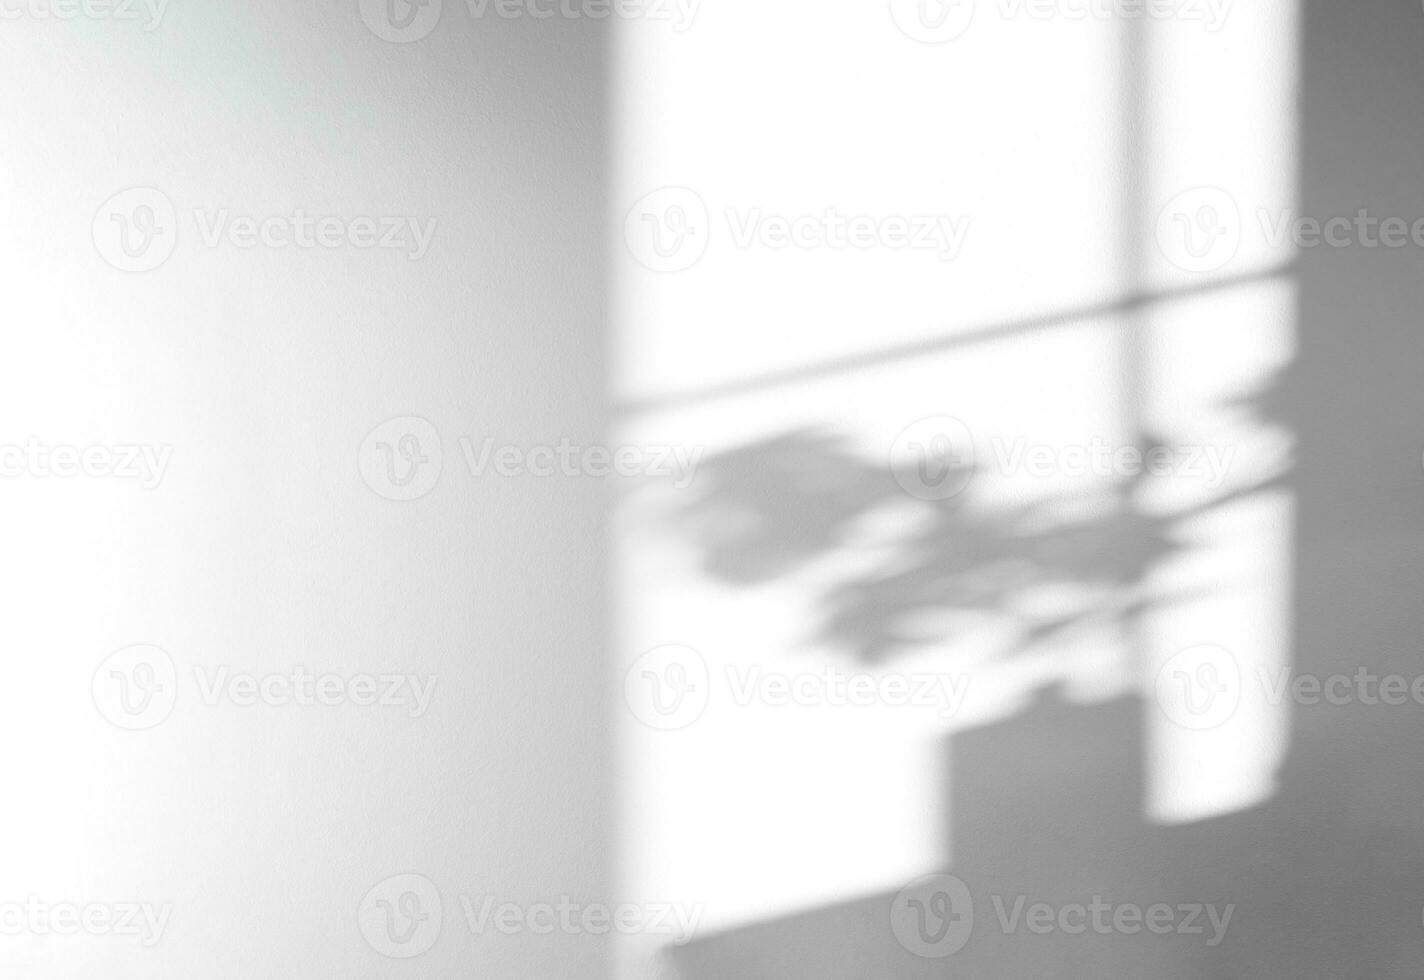 Shadow Flower and leaves silhouette overlay on white cement wall in bed room,Natural sunlight shining through window on concrete texture surface background.Backdrop for product presentation photo